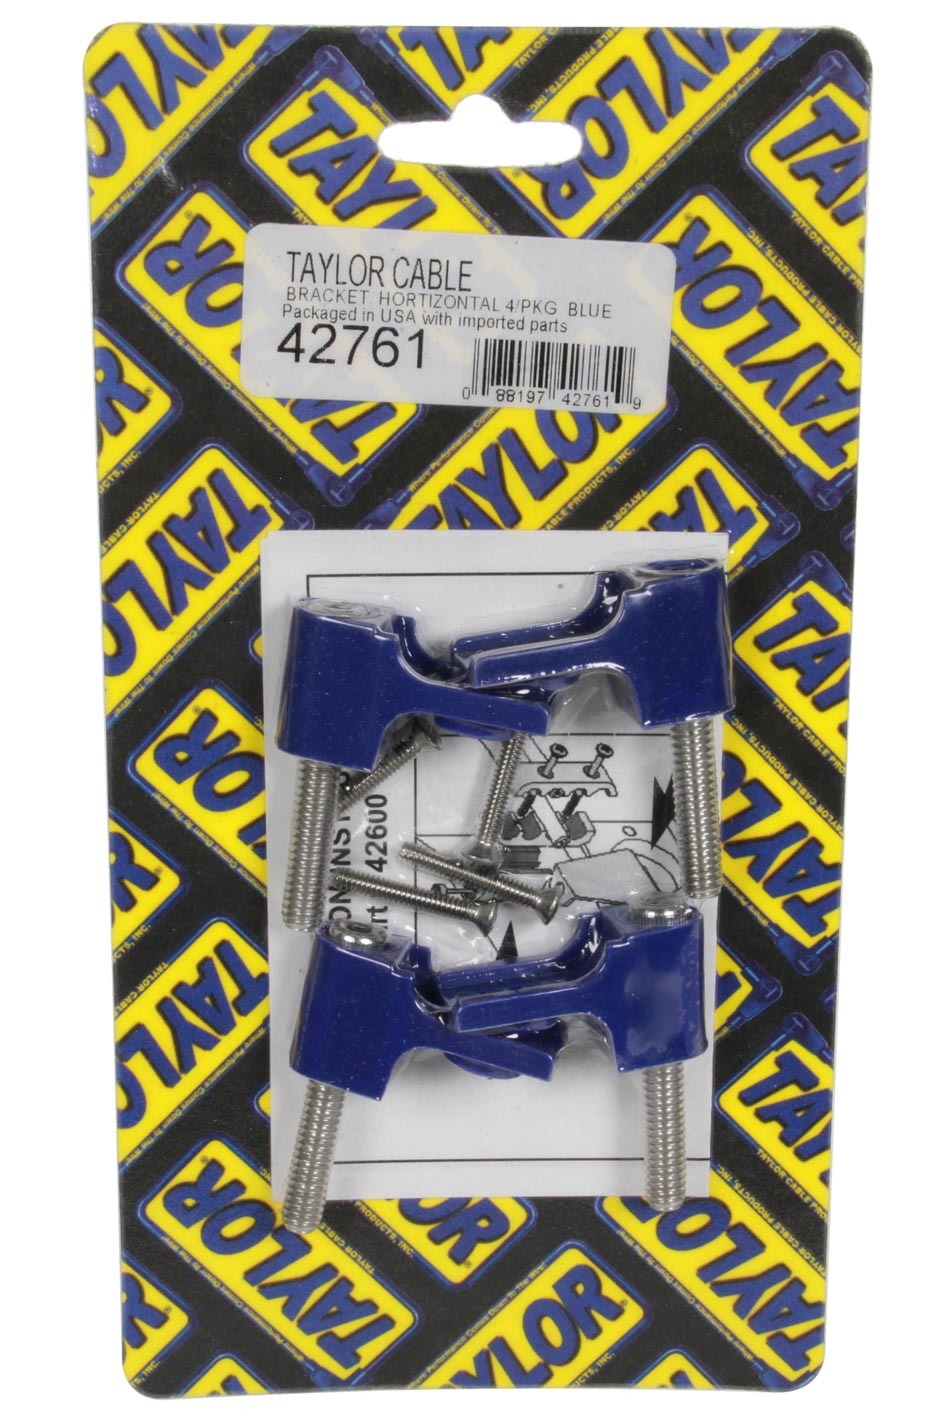 Taylor Cable 42761 Wire Loom Bracket, Horizontal, Nylon, Blue, Mounts Clamp Style Separators, Set of 4